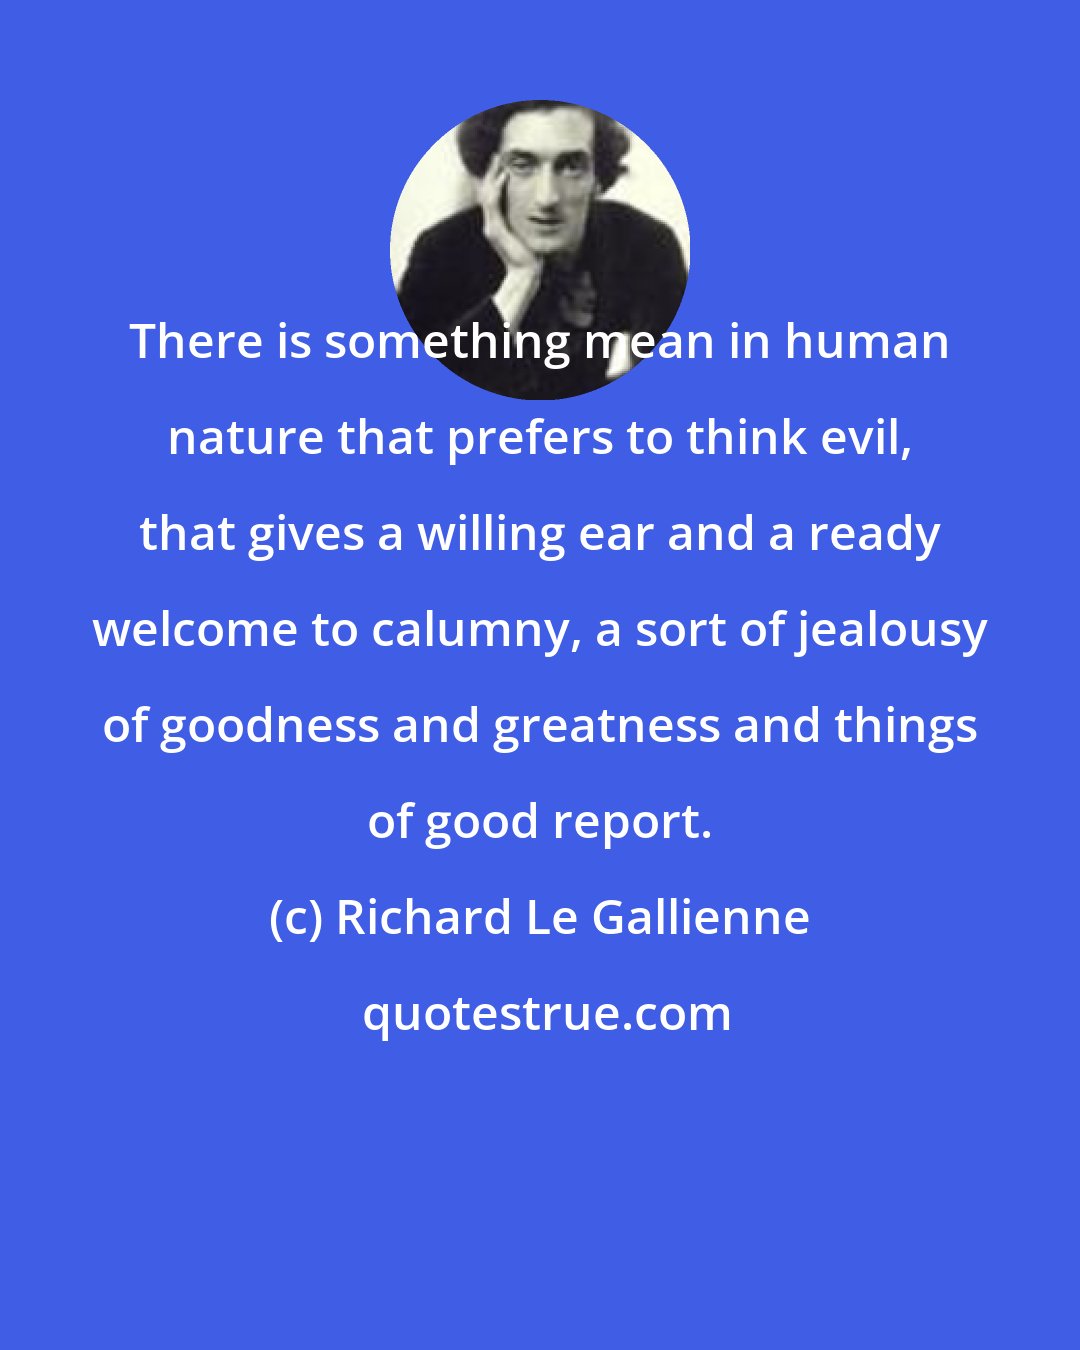 Richard Le Gallienne: There is something mean in human nature that prefers to think evil, that gives a willing ear and a ready welcome to calumny, a sort of jealousy of goodness and greatness and things of good report.